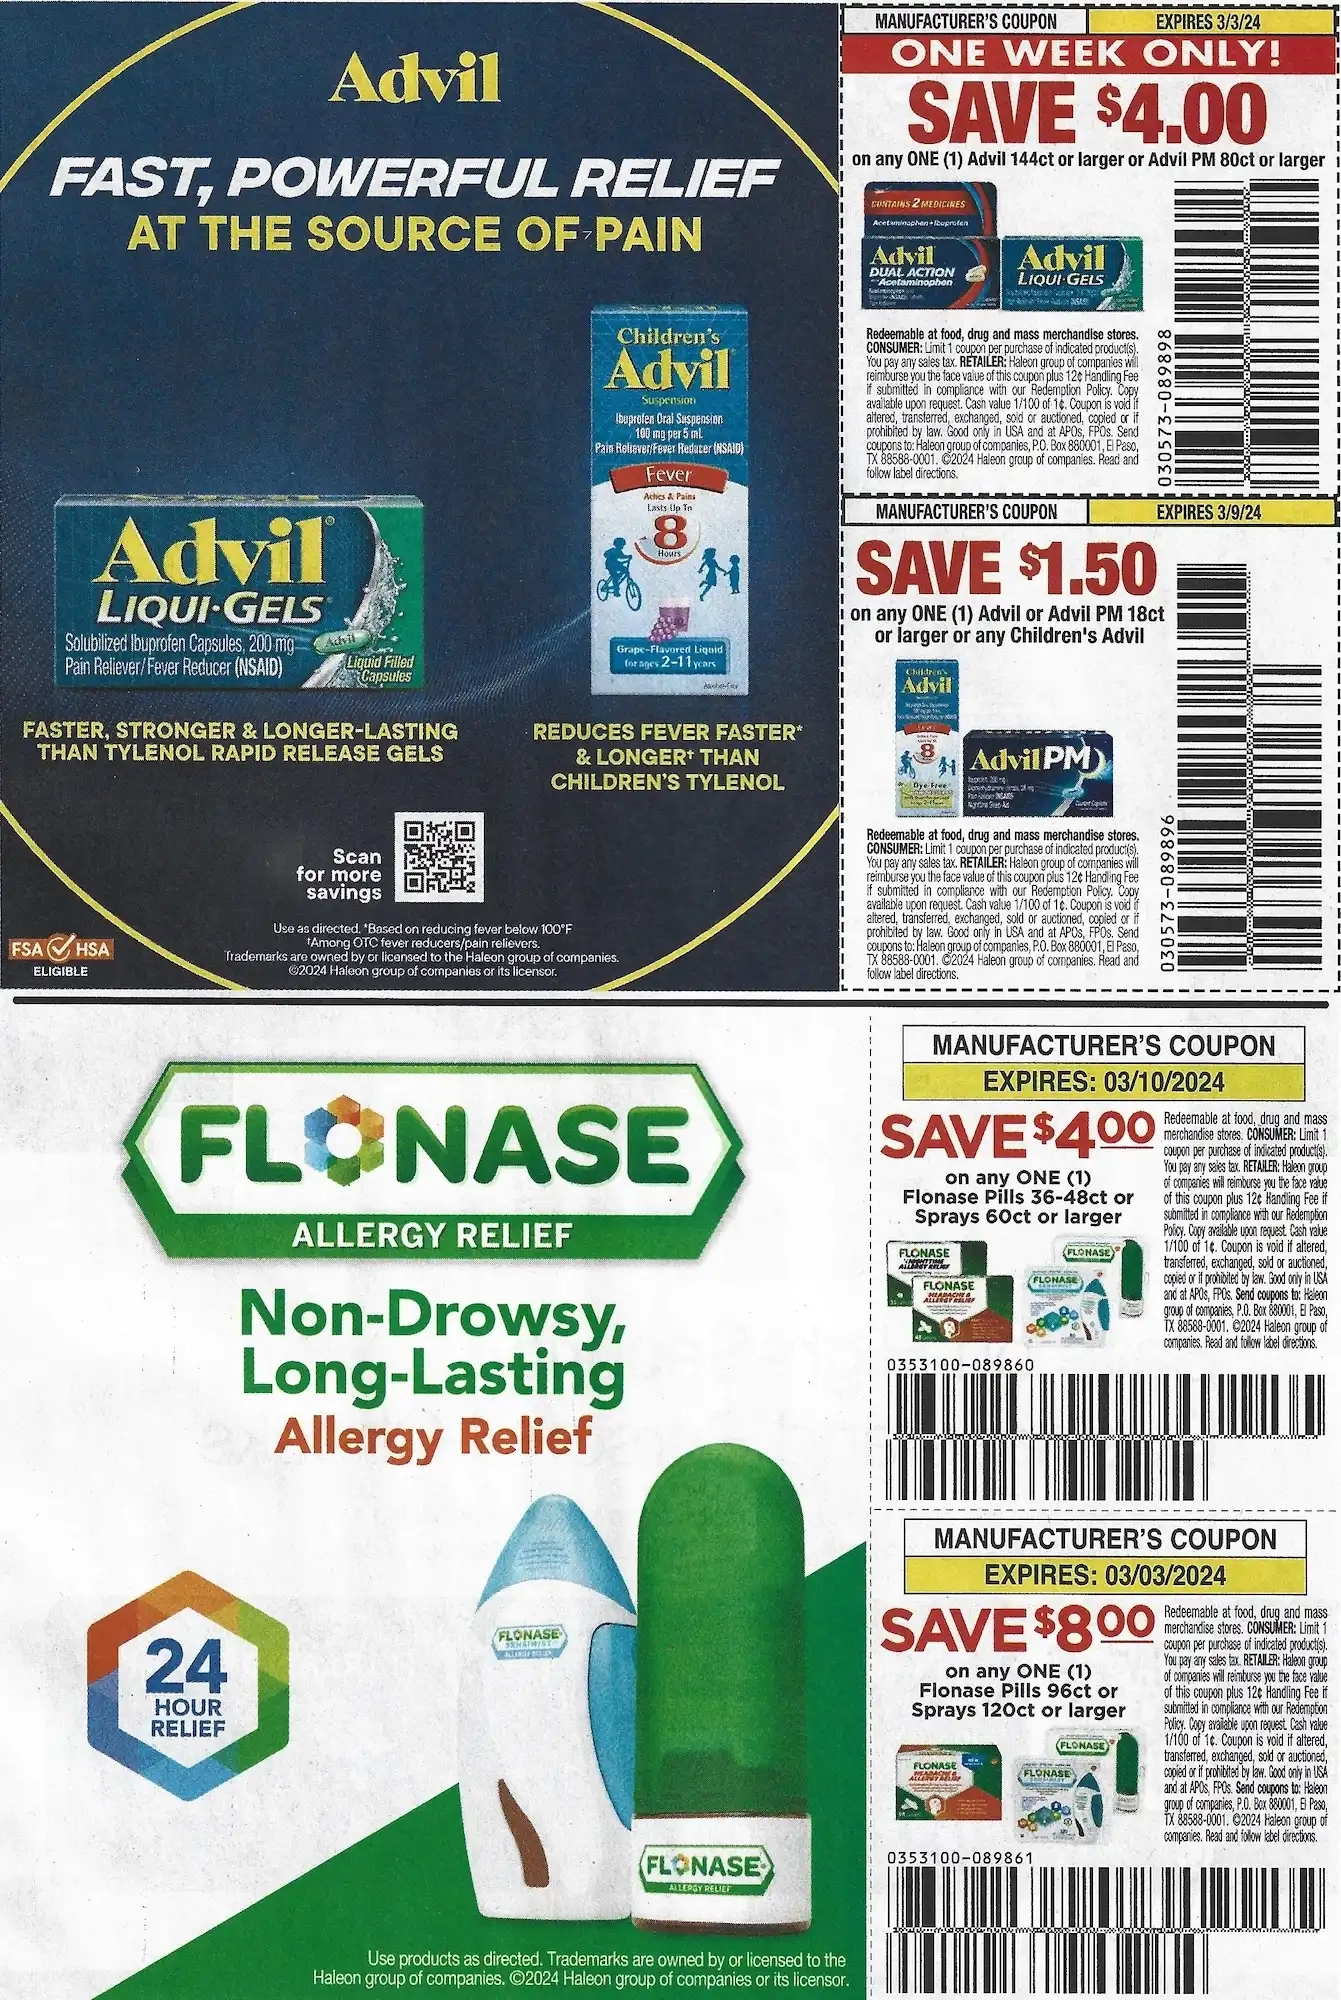 Save.Com Weekly Mailer Coupons - 02/24/2024 Advil Flonase